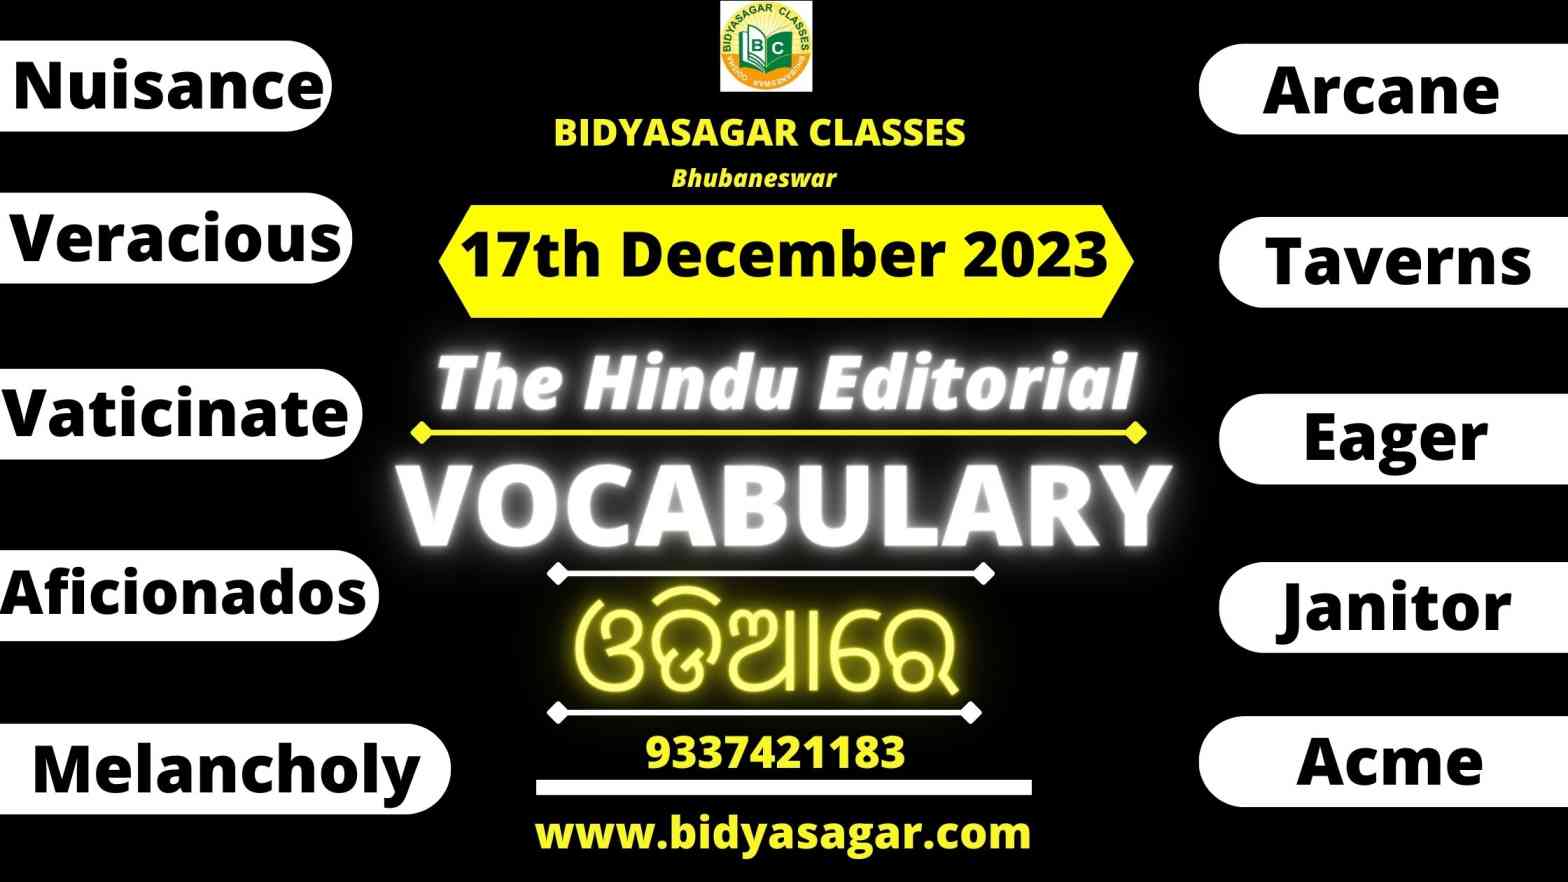 The Hindu Editorial Vocabulary of 17th December 2023